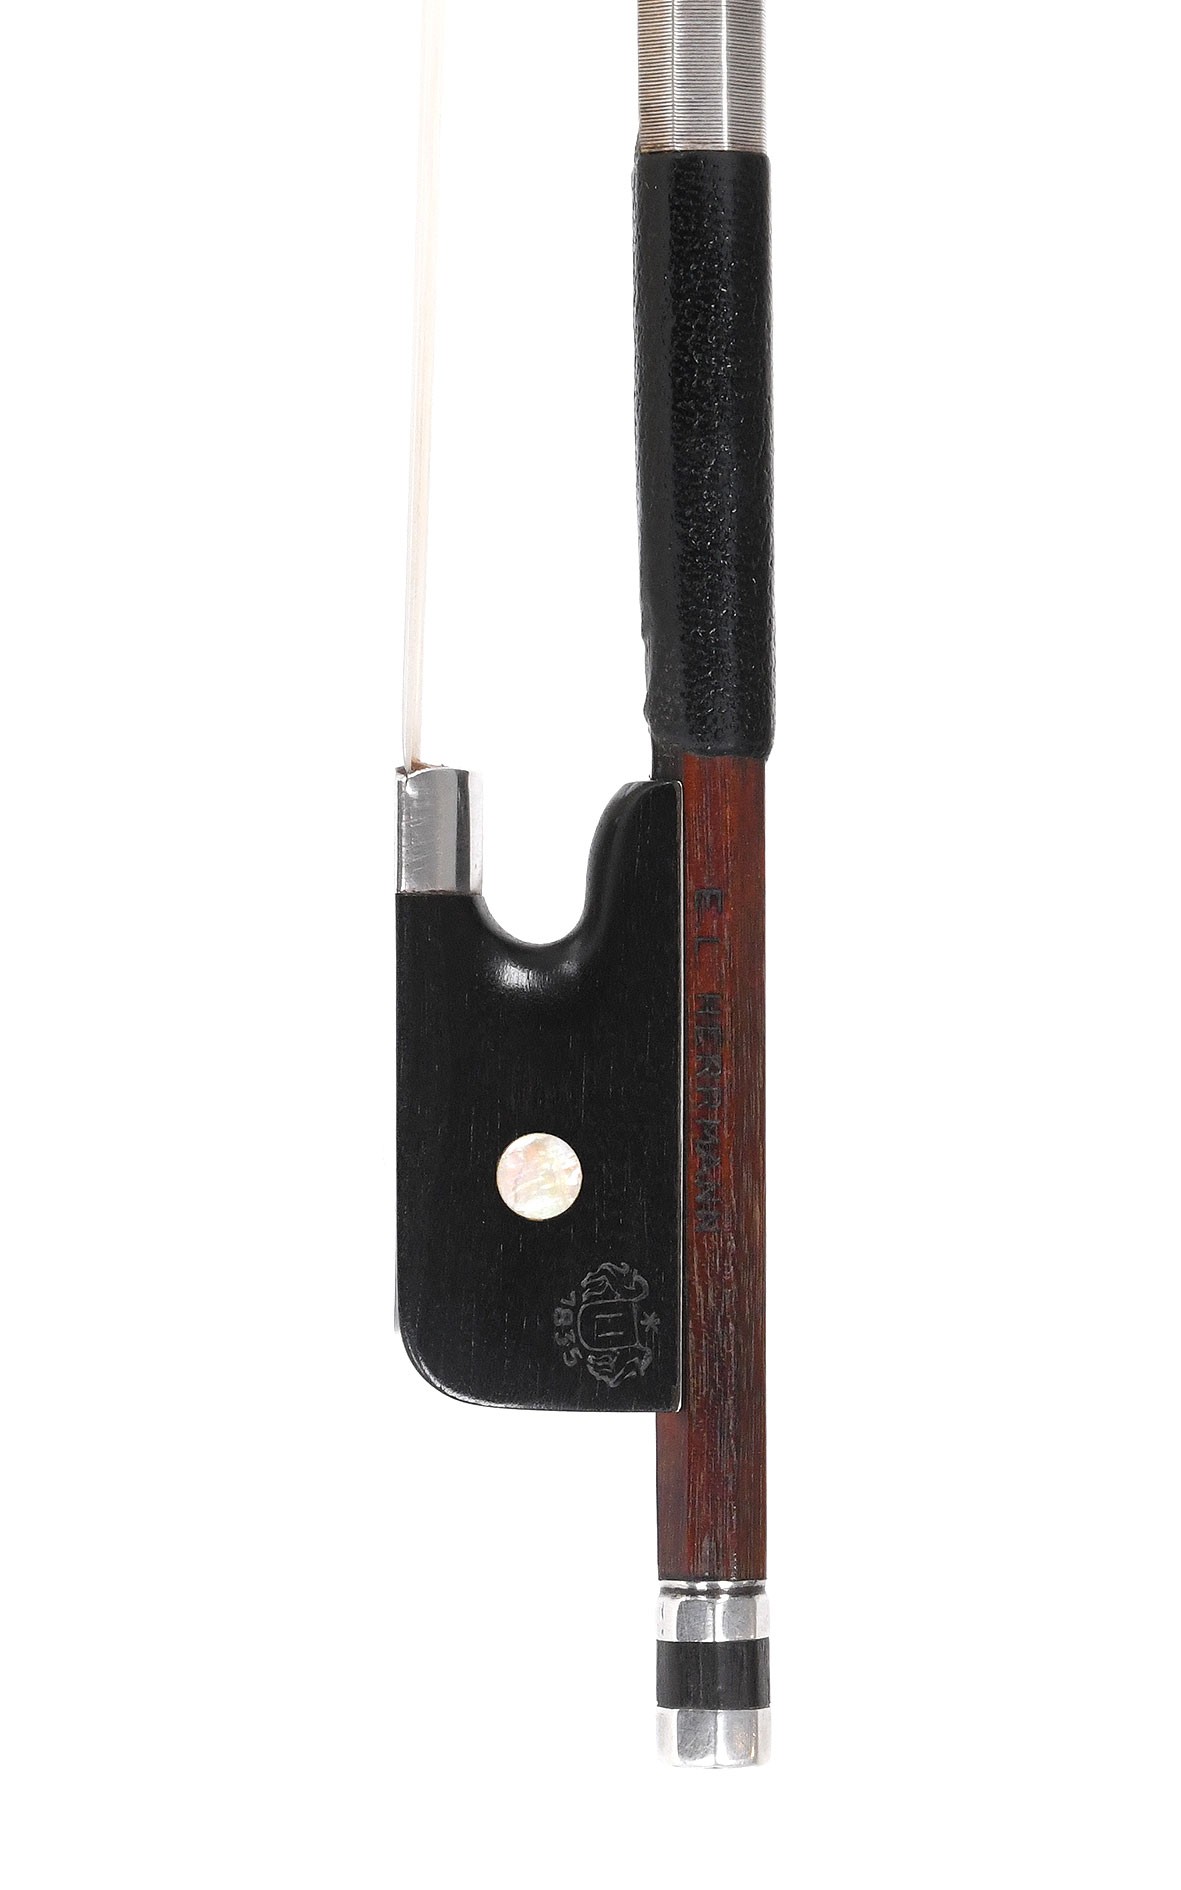 Fine viola bow by E.L. Herrmann, Markneukirchen from professional ownership